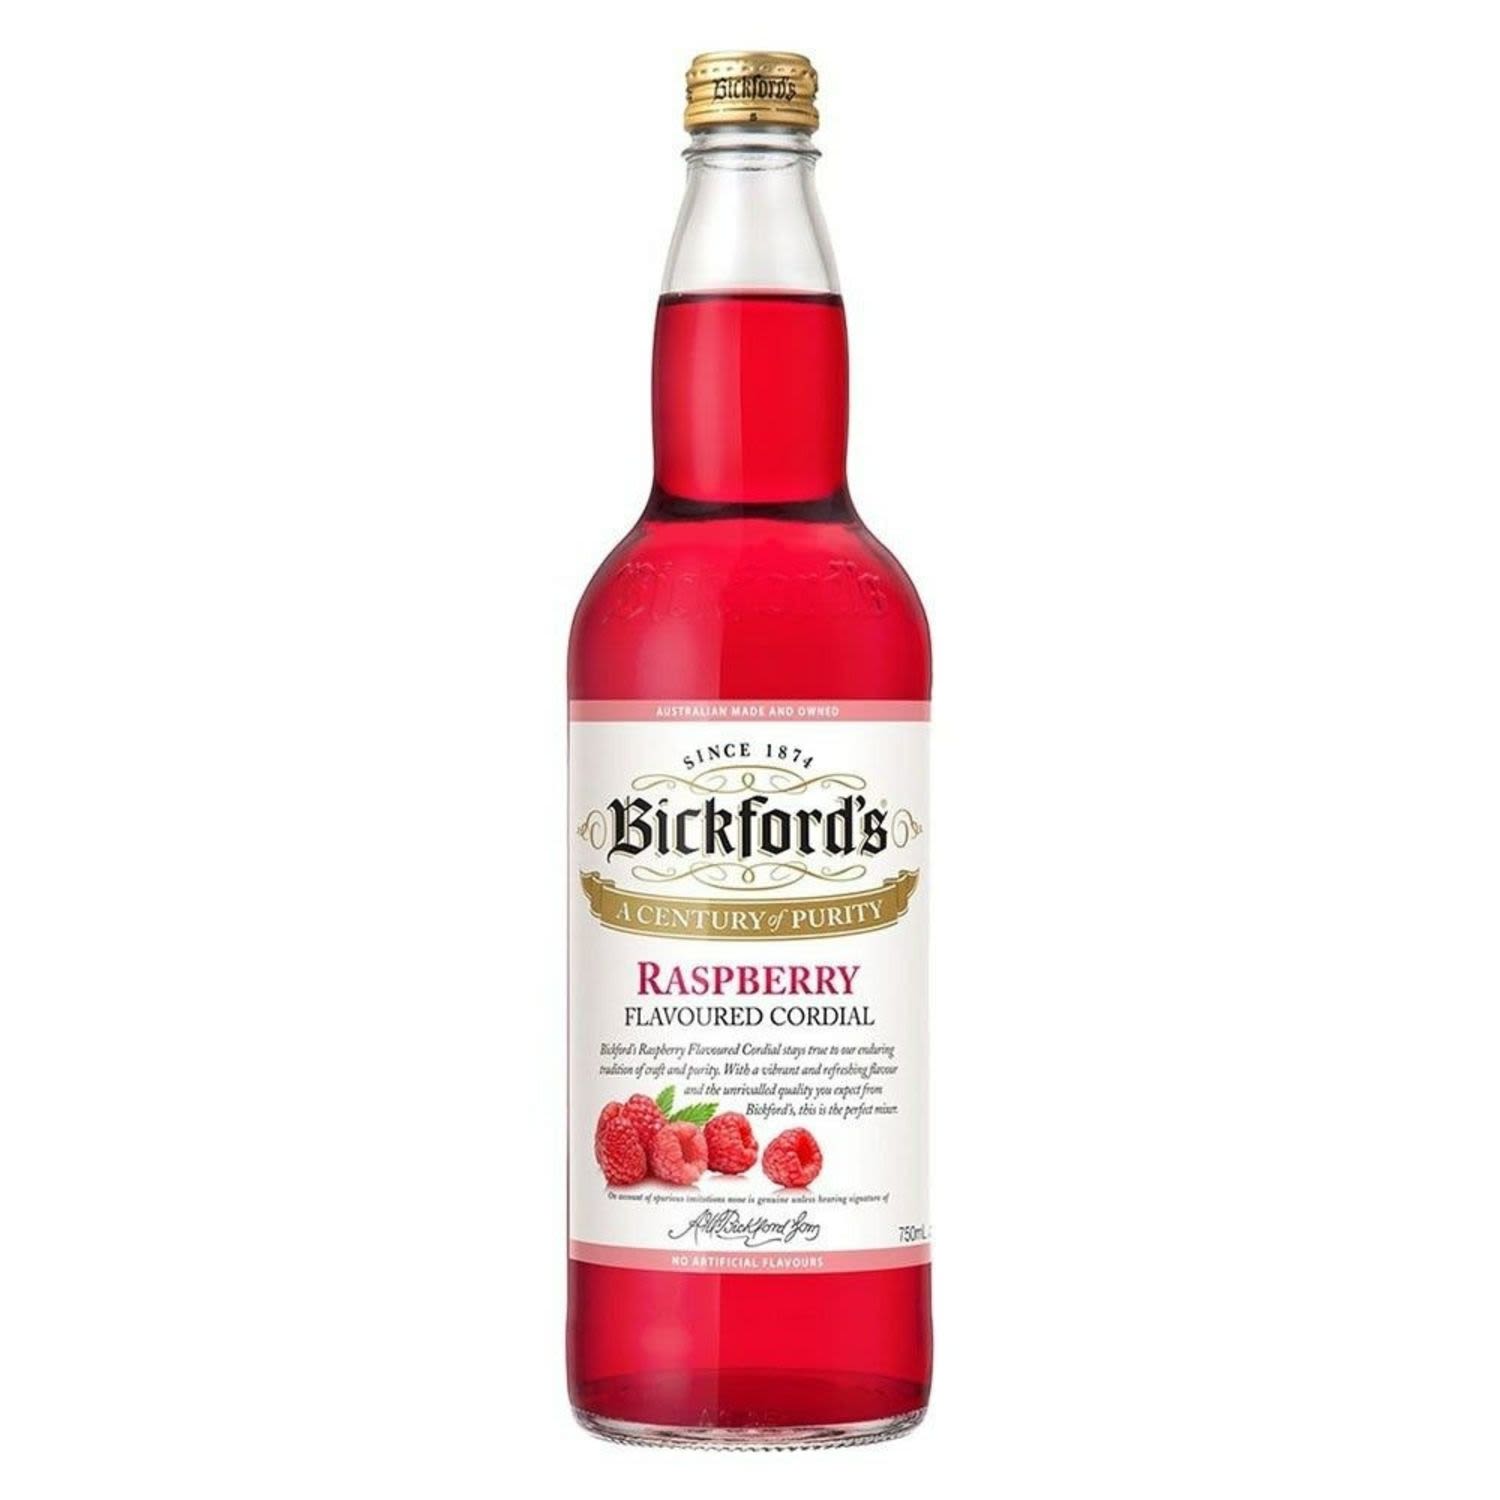 Bickford’s Raspberry Flavoured Cordial stays true to Bickford’s enduring tradition of craft and purity. With a vibrant and refreshing flavour and the unrivalled quality you expect from Bickfords, this is the perfect mixer.<br /> <br />Alcohol Volume: 0.0%<br /><br />Pack Format: Bottle<br /><br />Standard Drinks: 0.0<br /><br />Pack Type: Bottle<br />